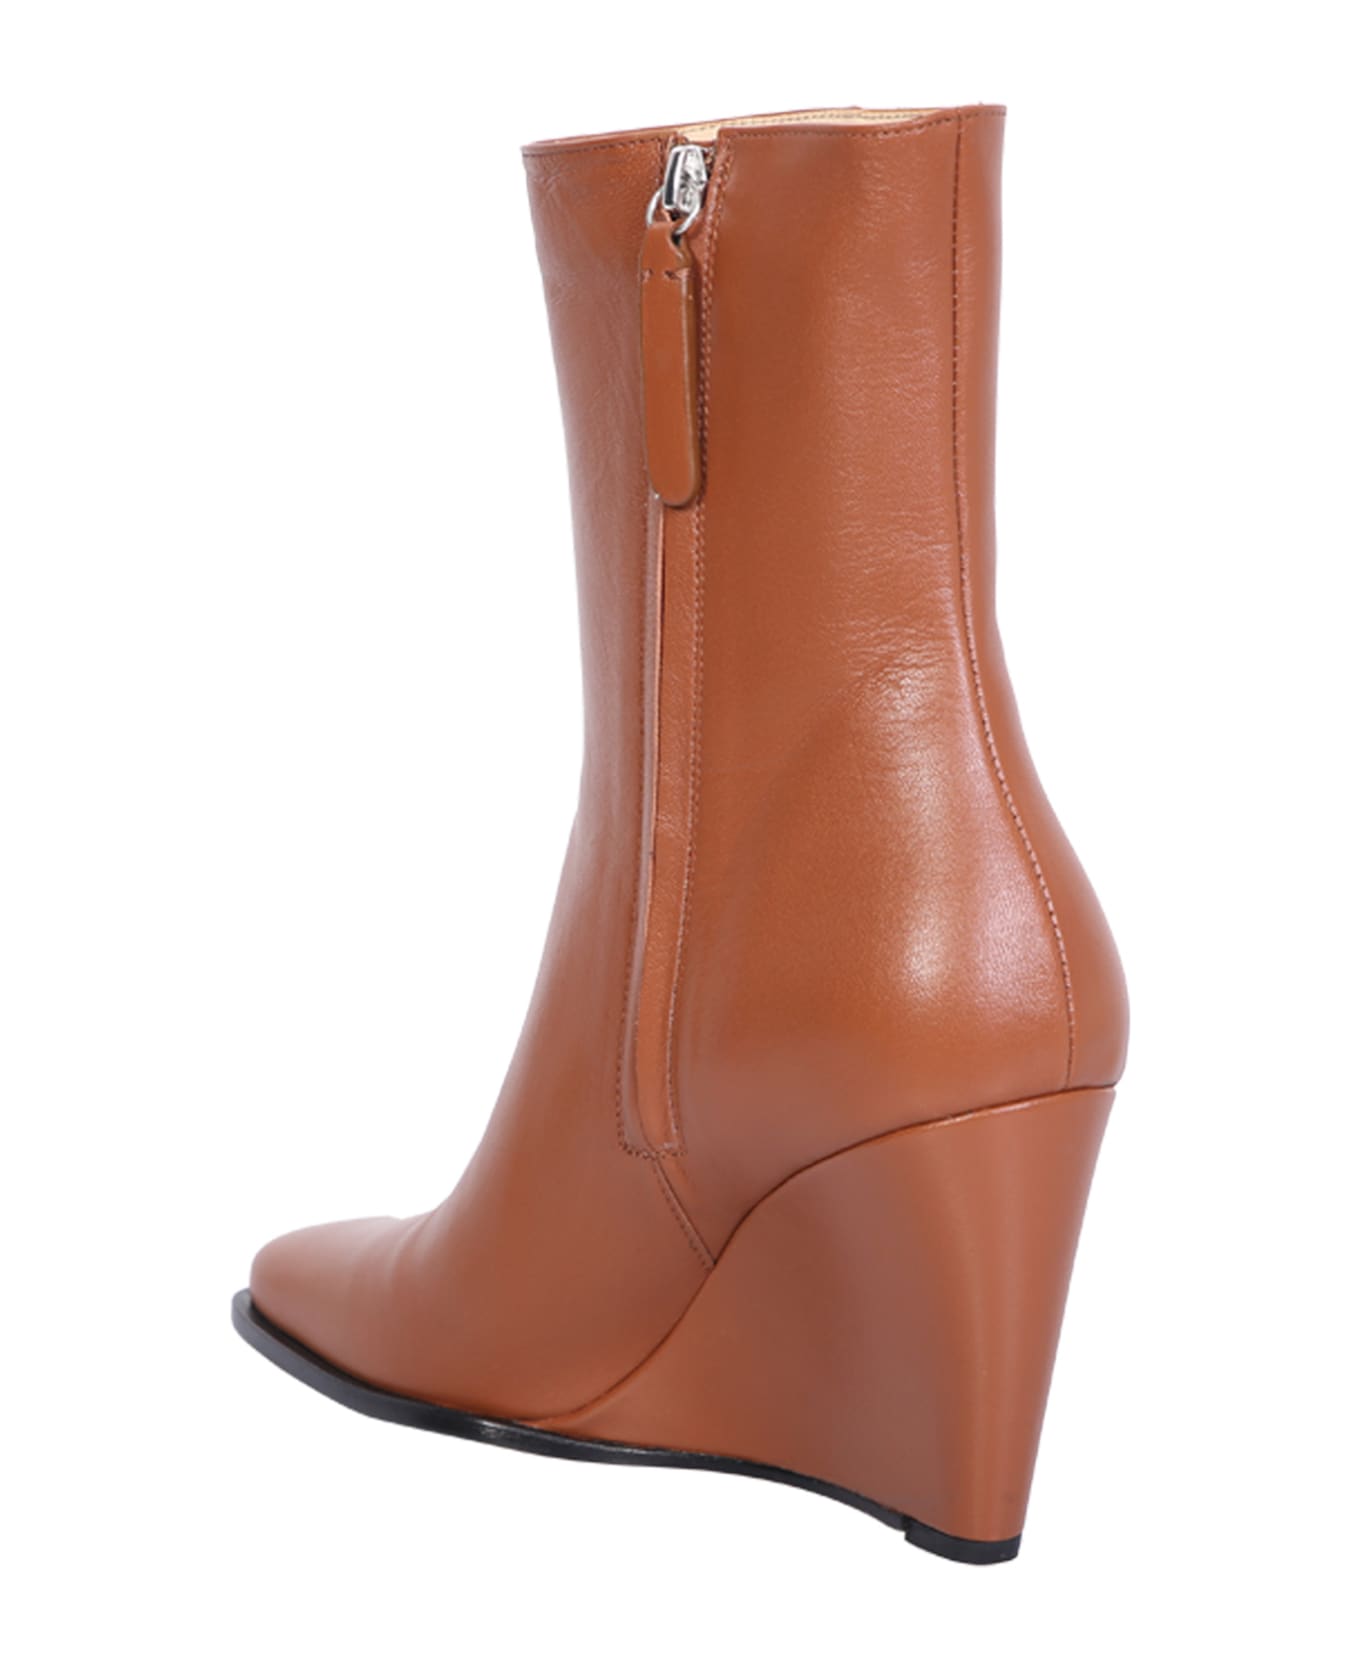 Wandler Brown Gaia Ankle Boots - Beige シューズ